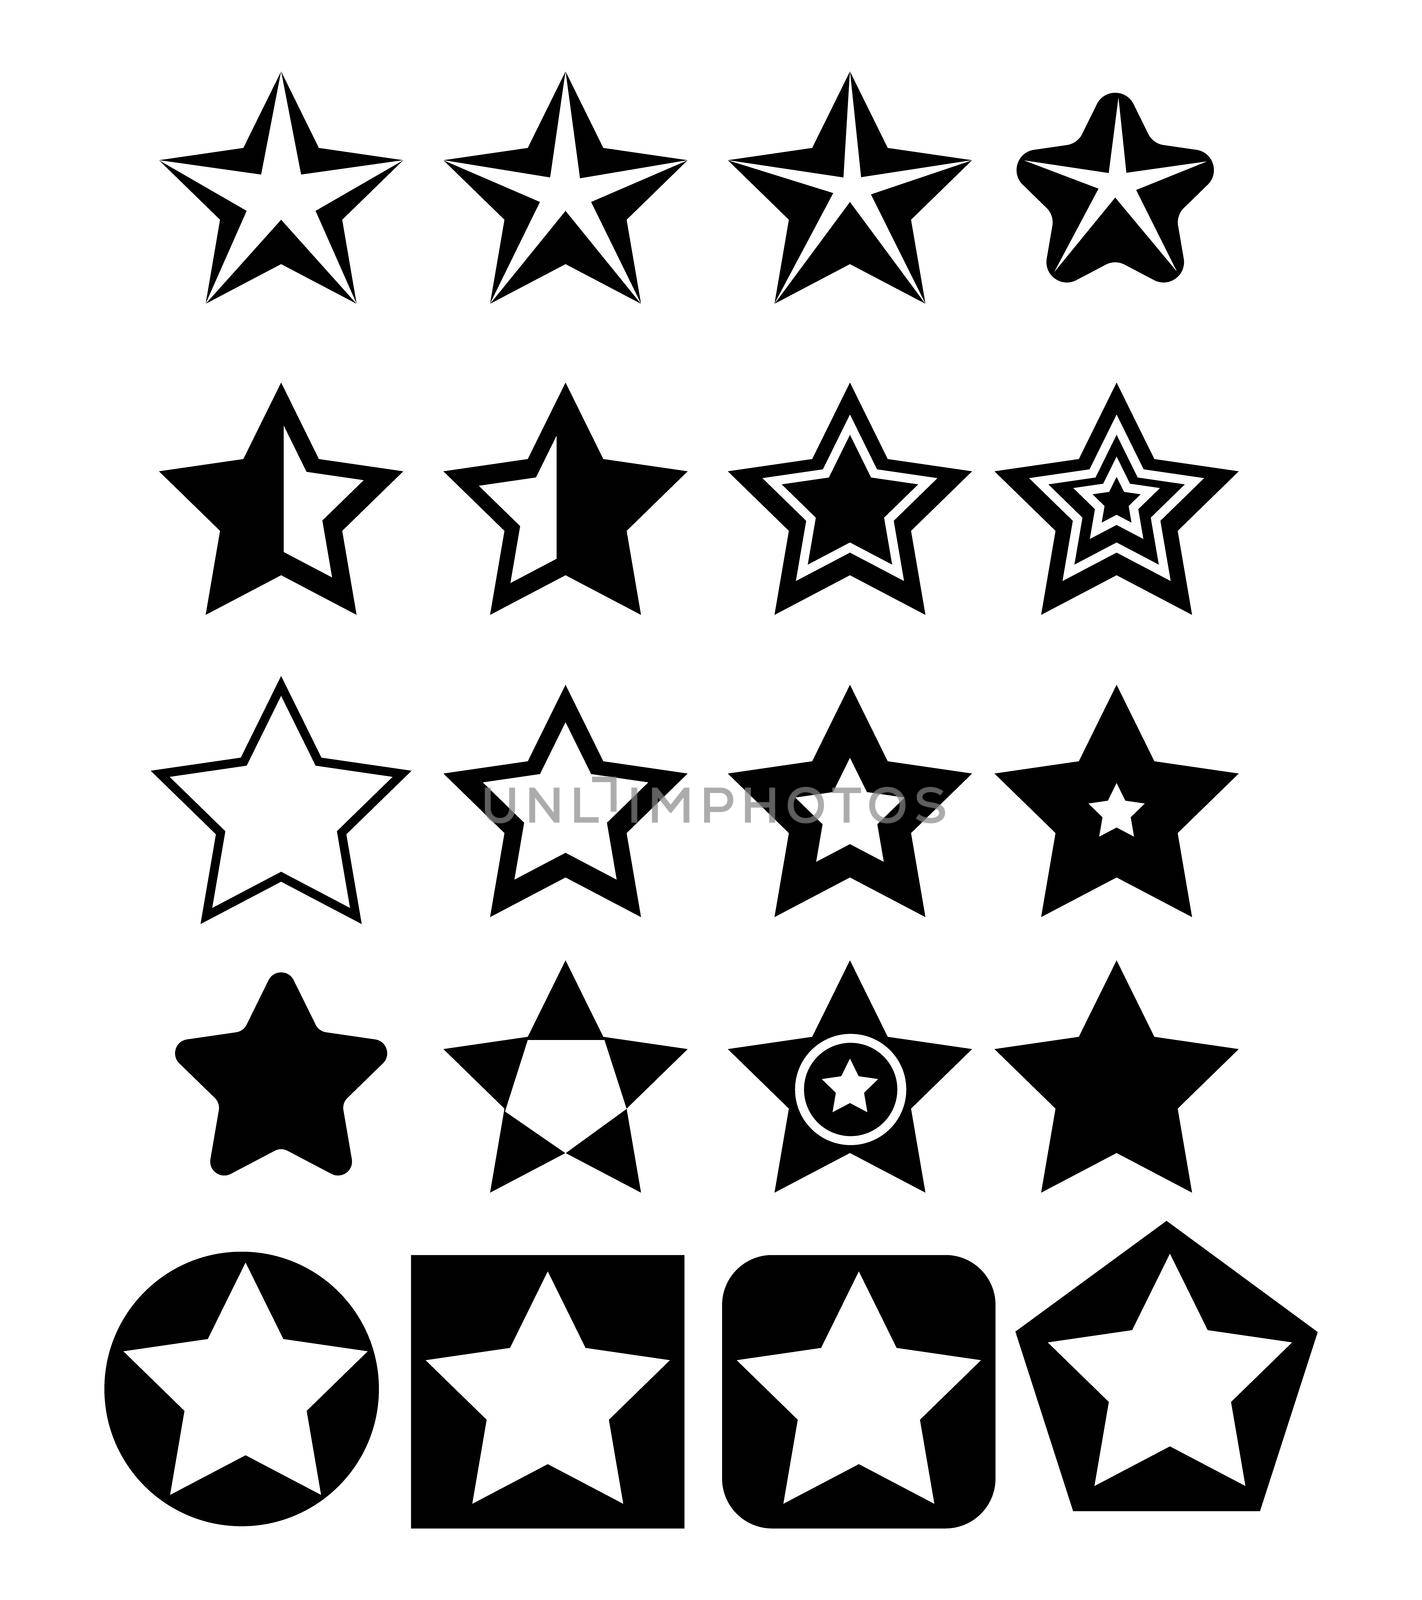 Pentagonal five point star collection icon design elements by Alxyzt